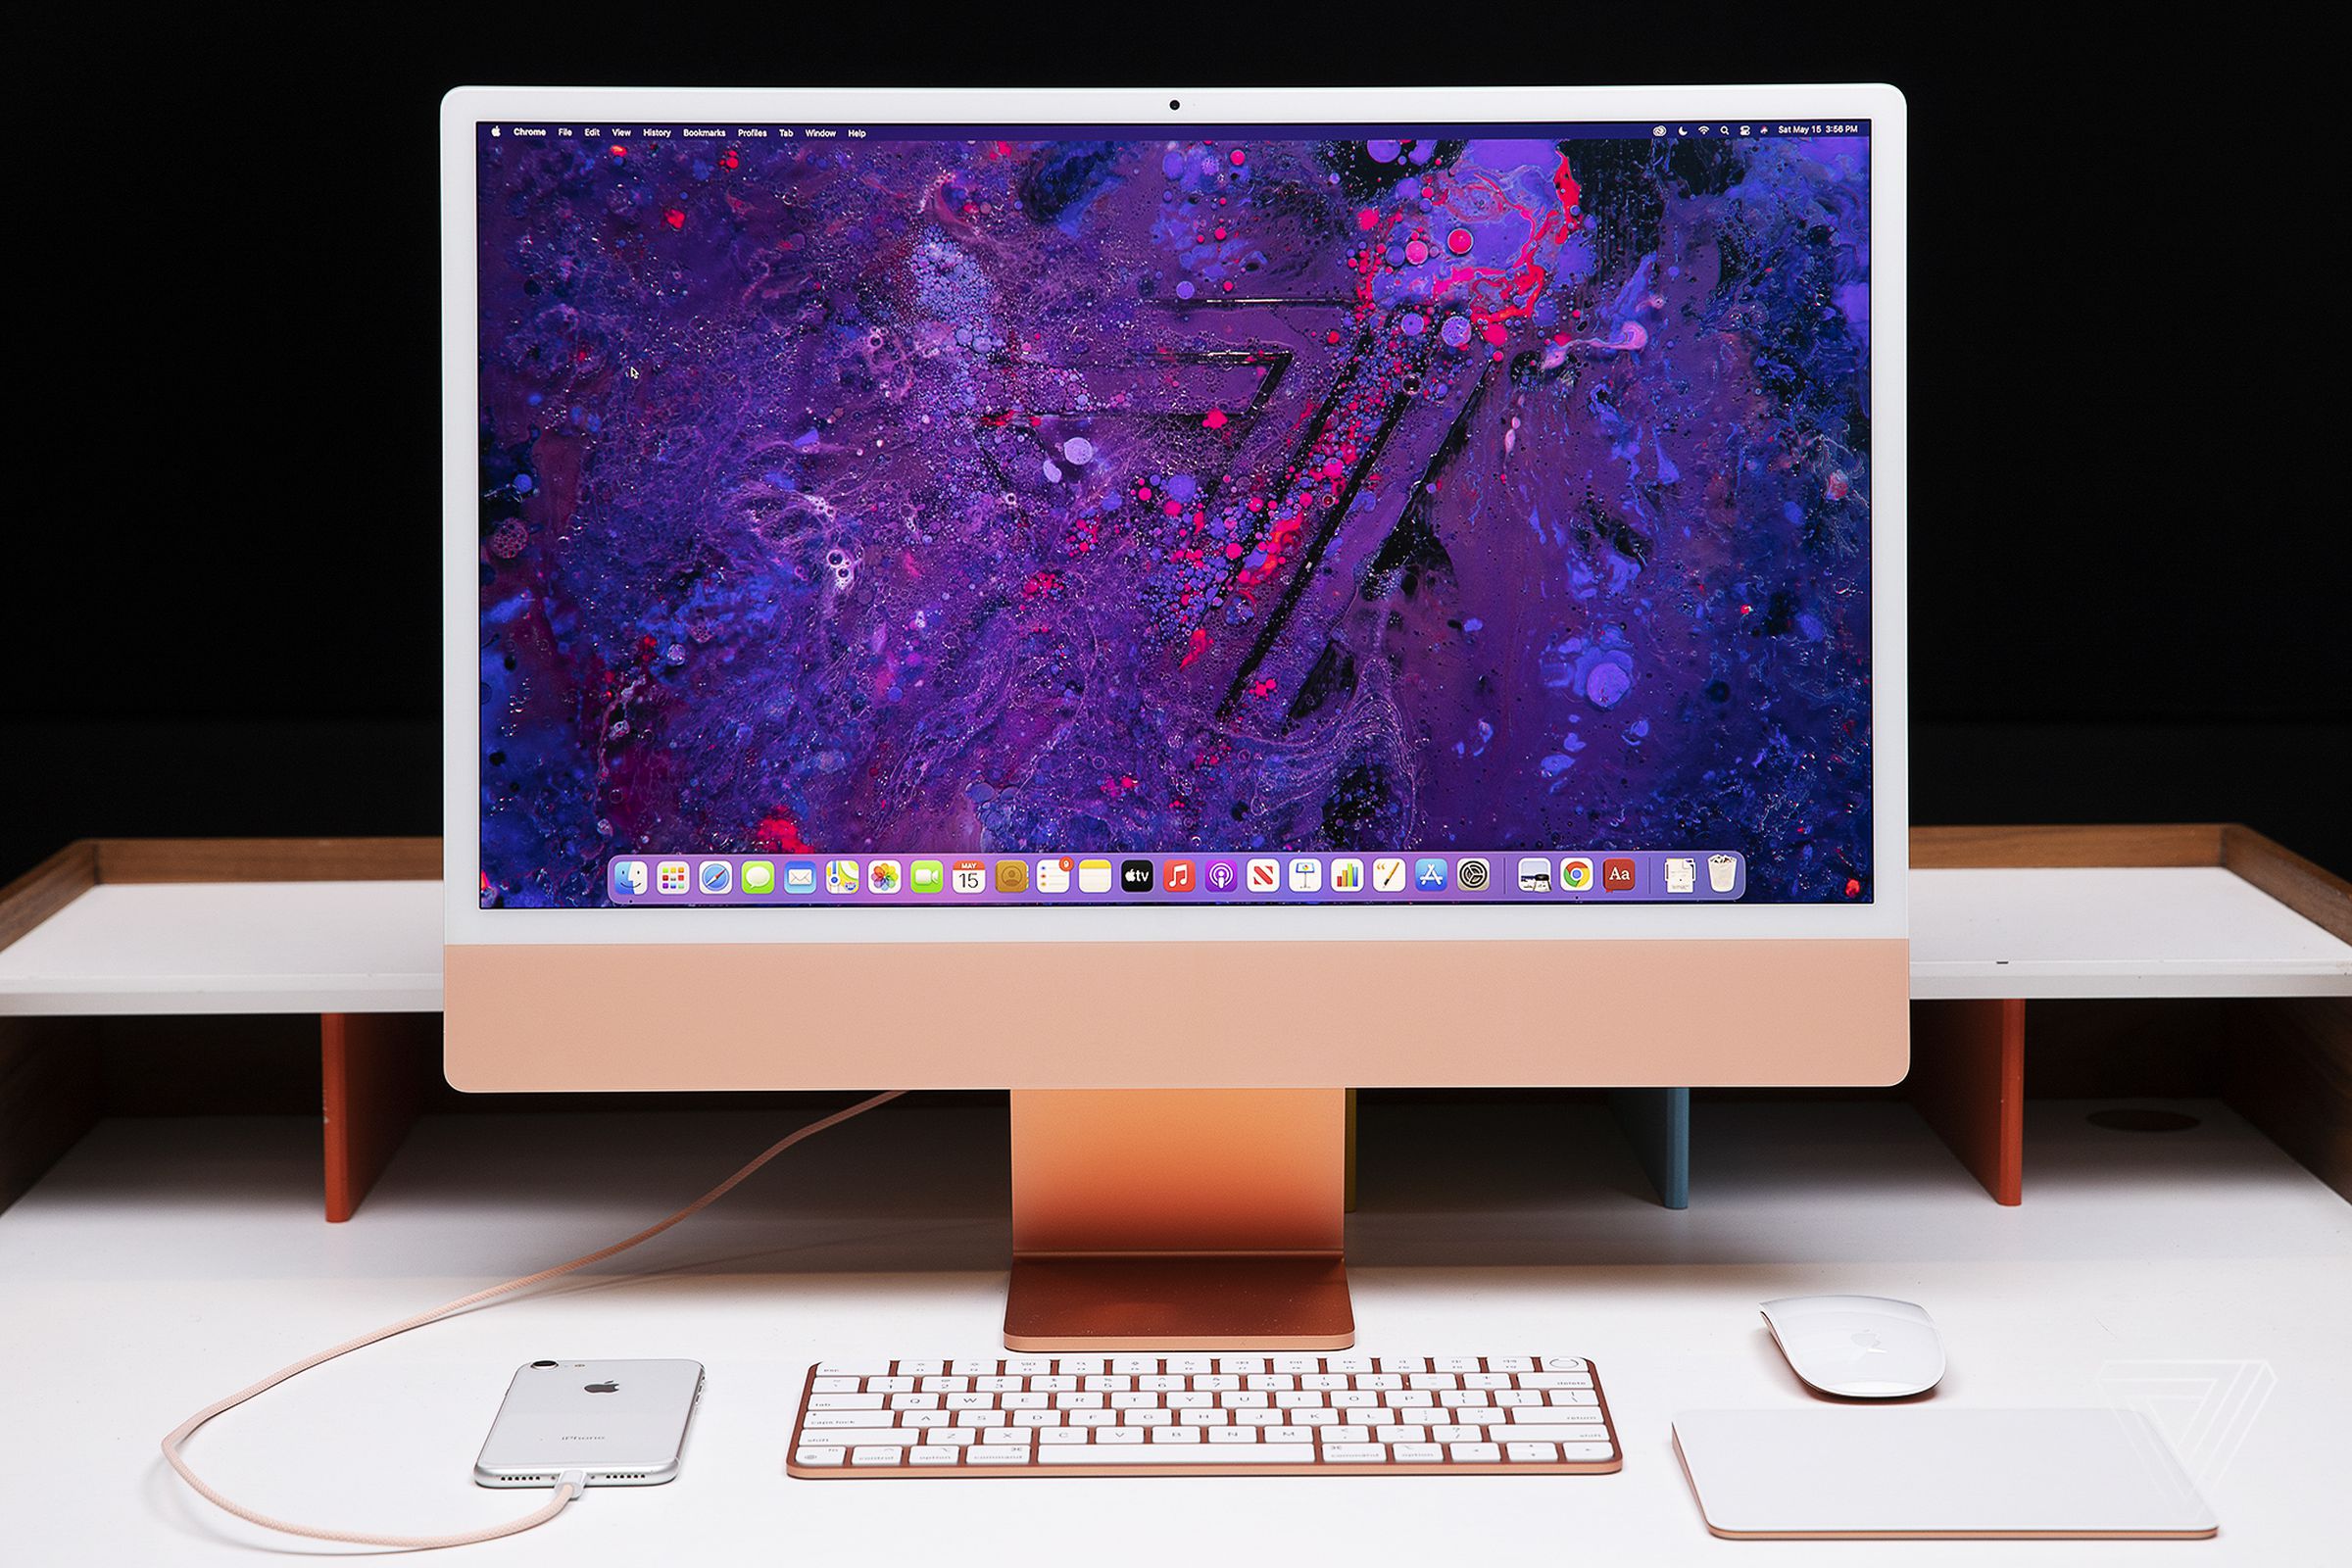 The new iMac is completely redesigned, but instantly recognizable